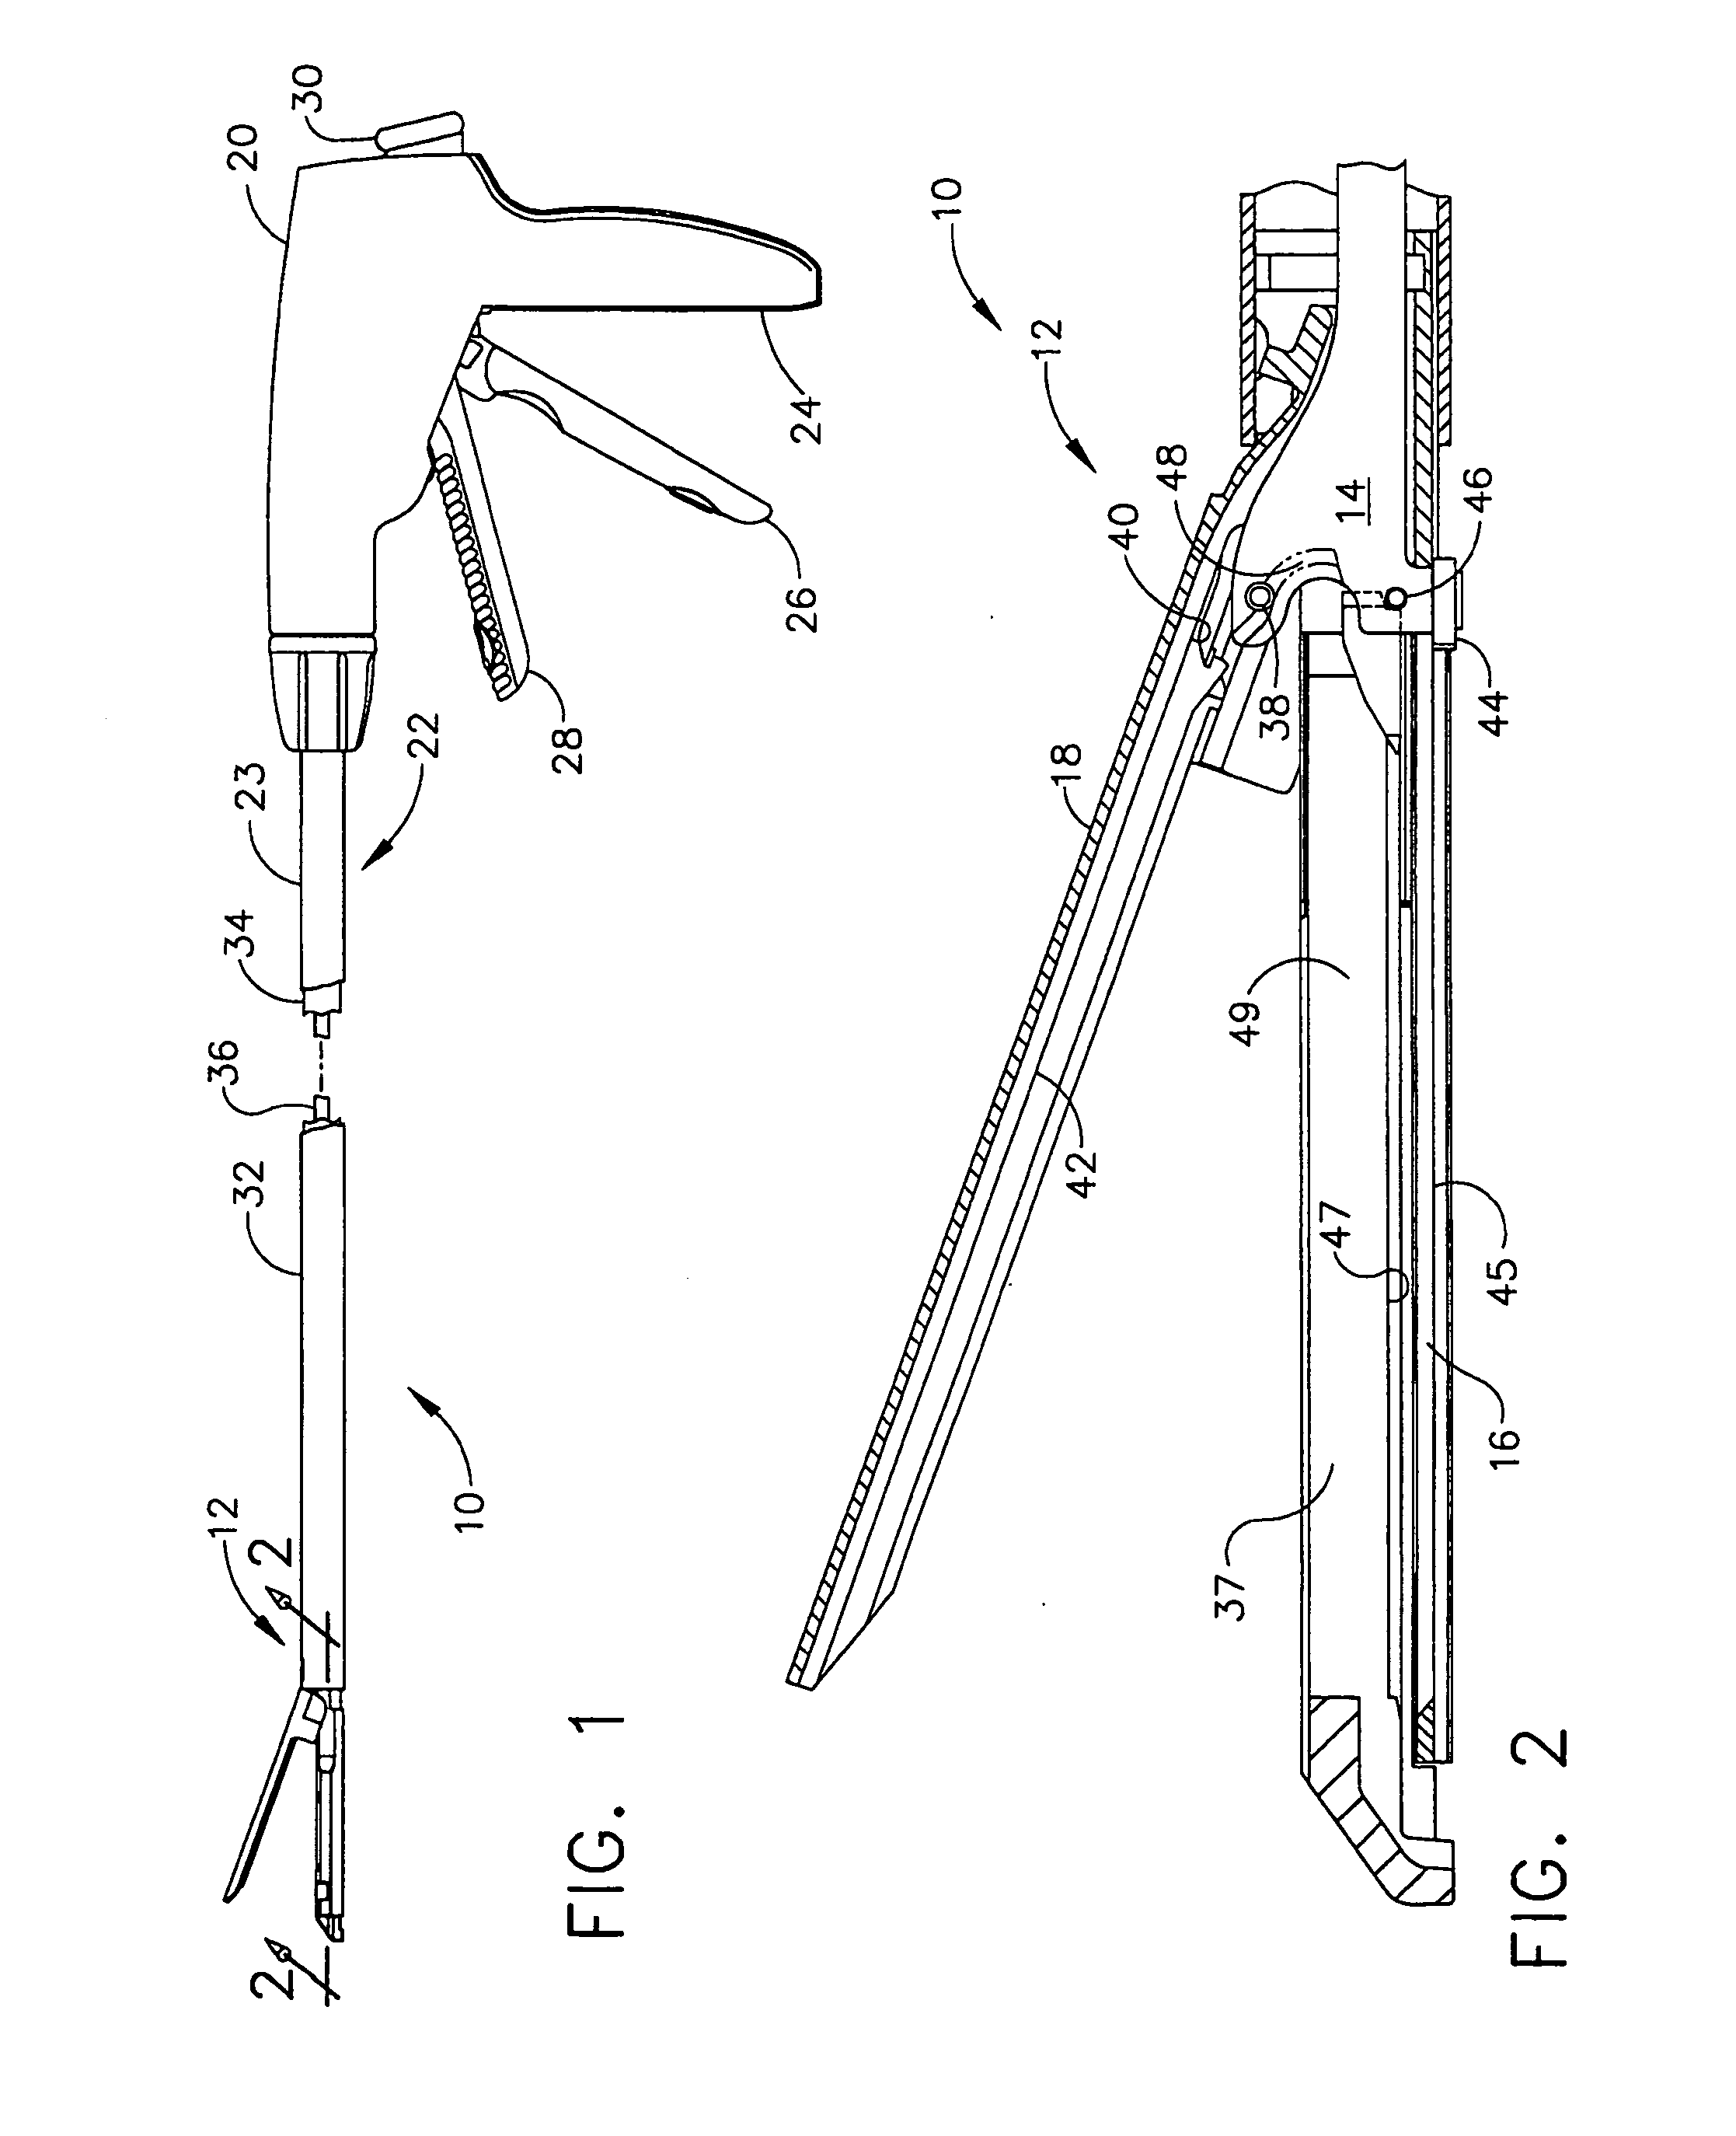 Surgical stapling instrument having a firing lockout for an unclosed anvil